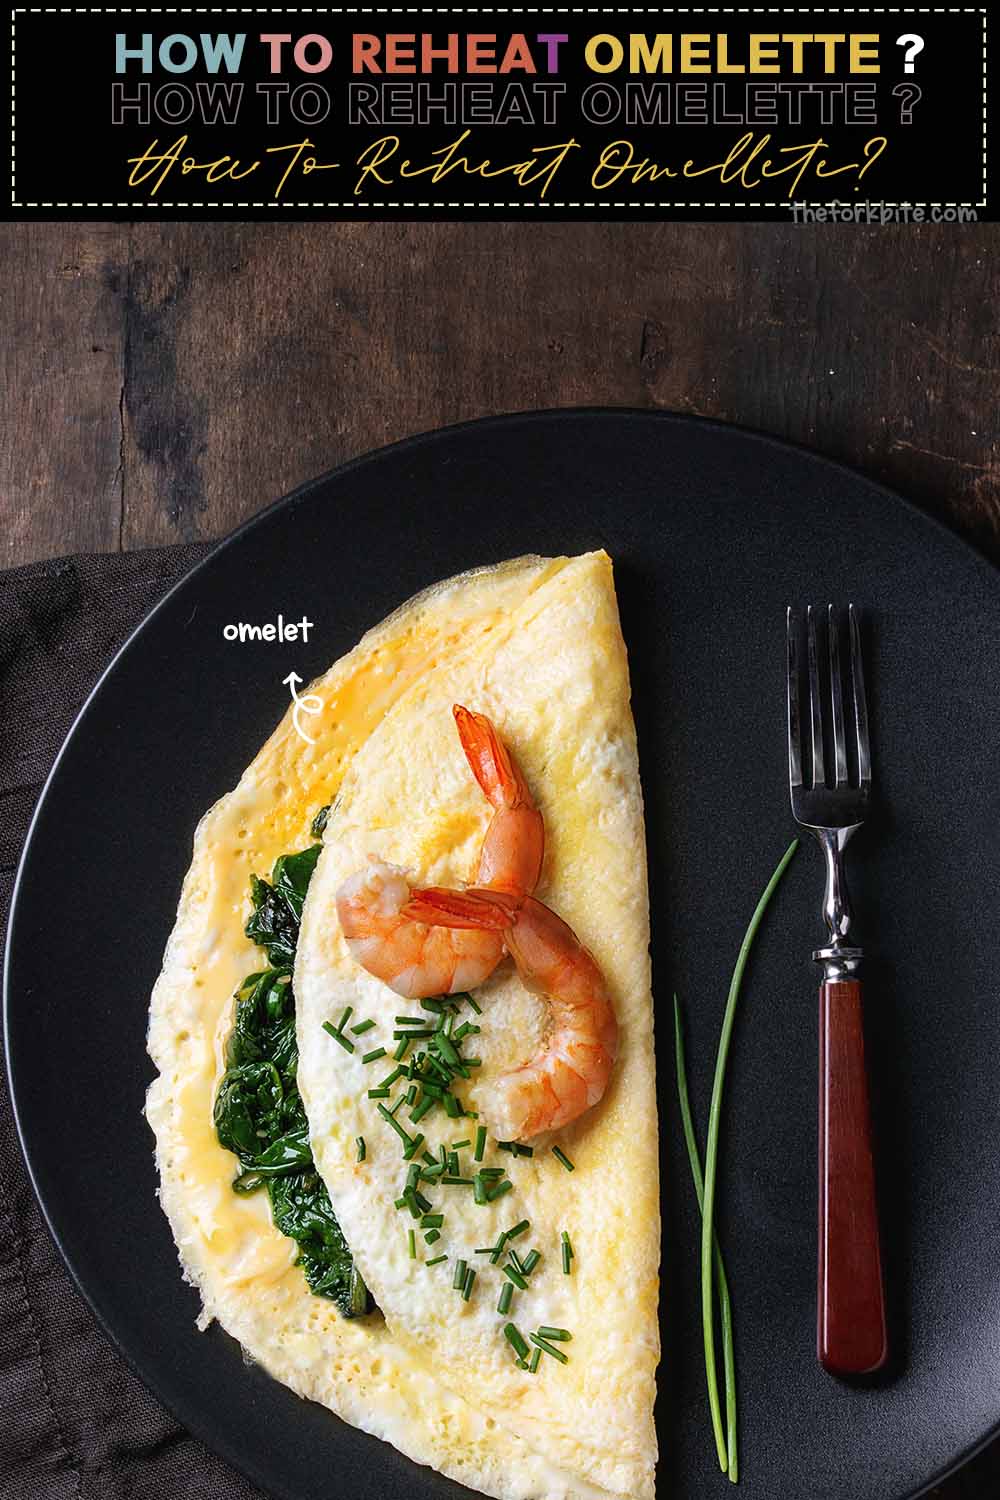 The trick to reheating an omelet lies in how you prepare and cool it down. Be sure to go slow while warming up leftovers and add a bit of fat unless you're using the microwave.